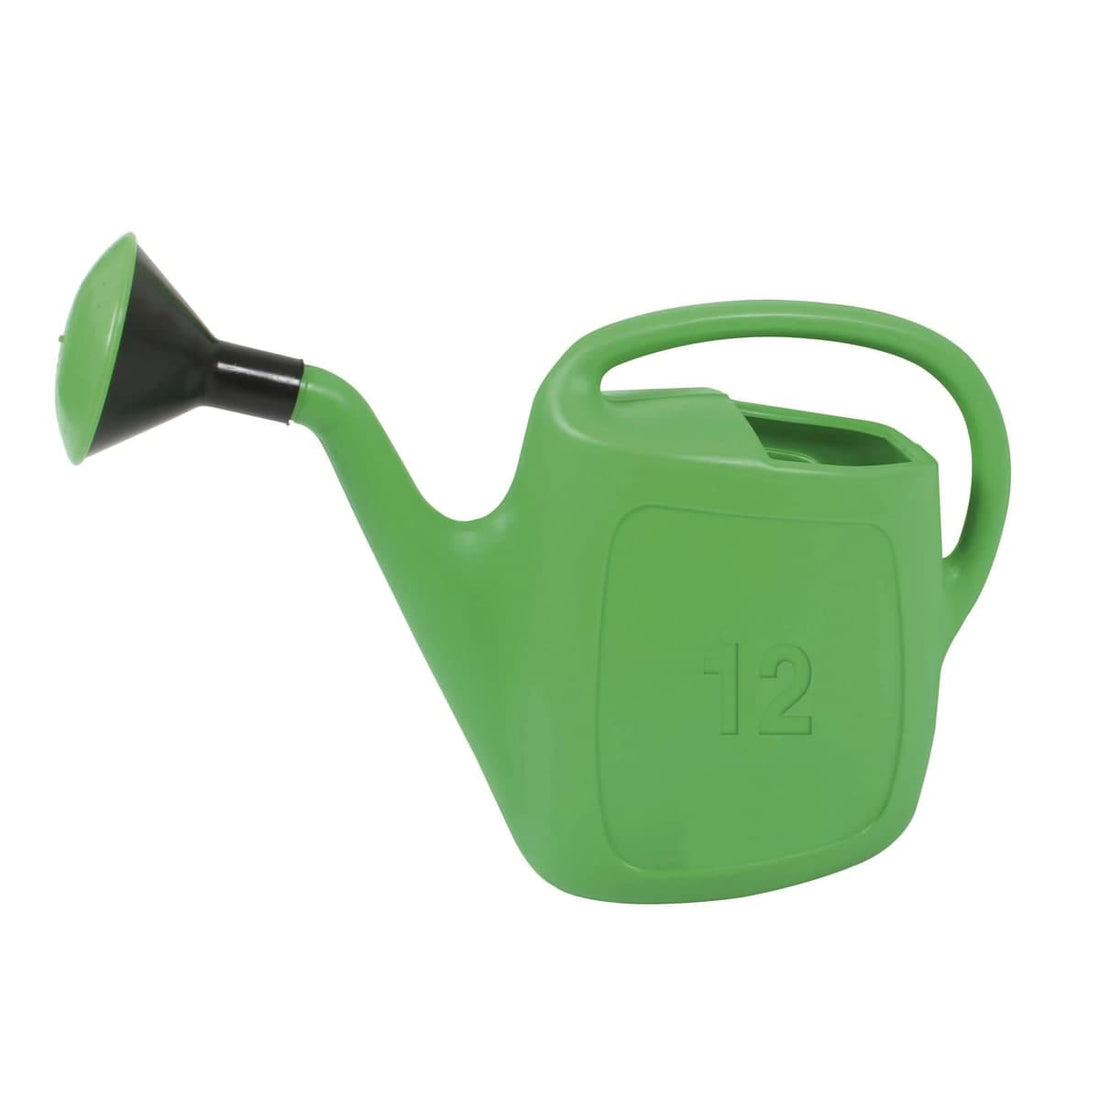 PLASTIC WATERING CAN 12 L - best price from Maltashopper.com BR500430018